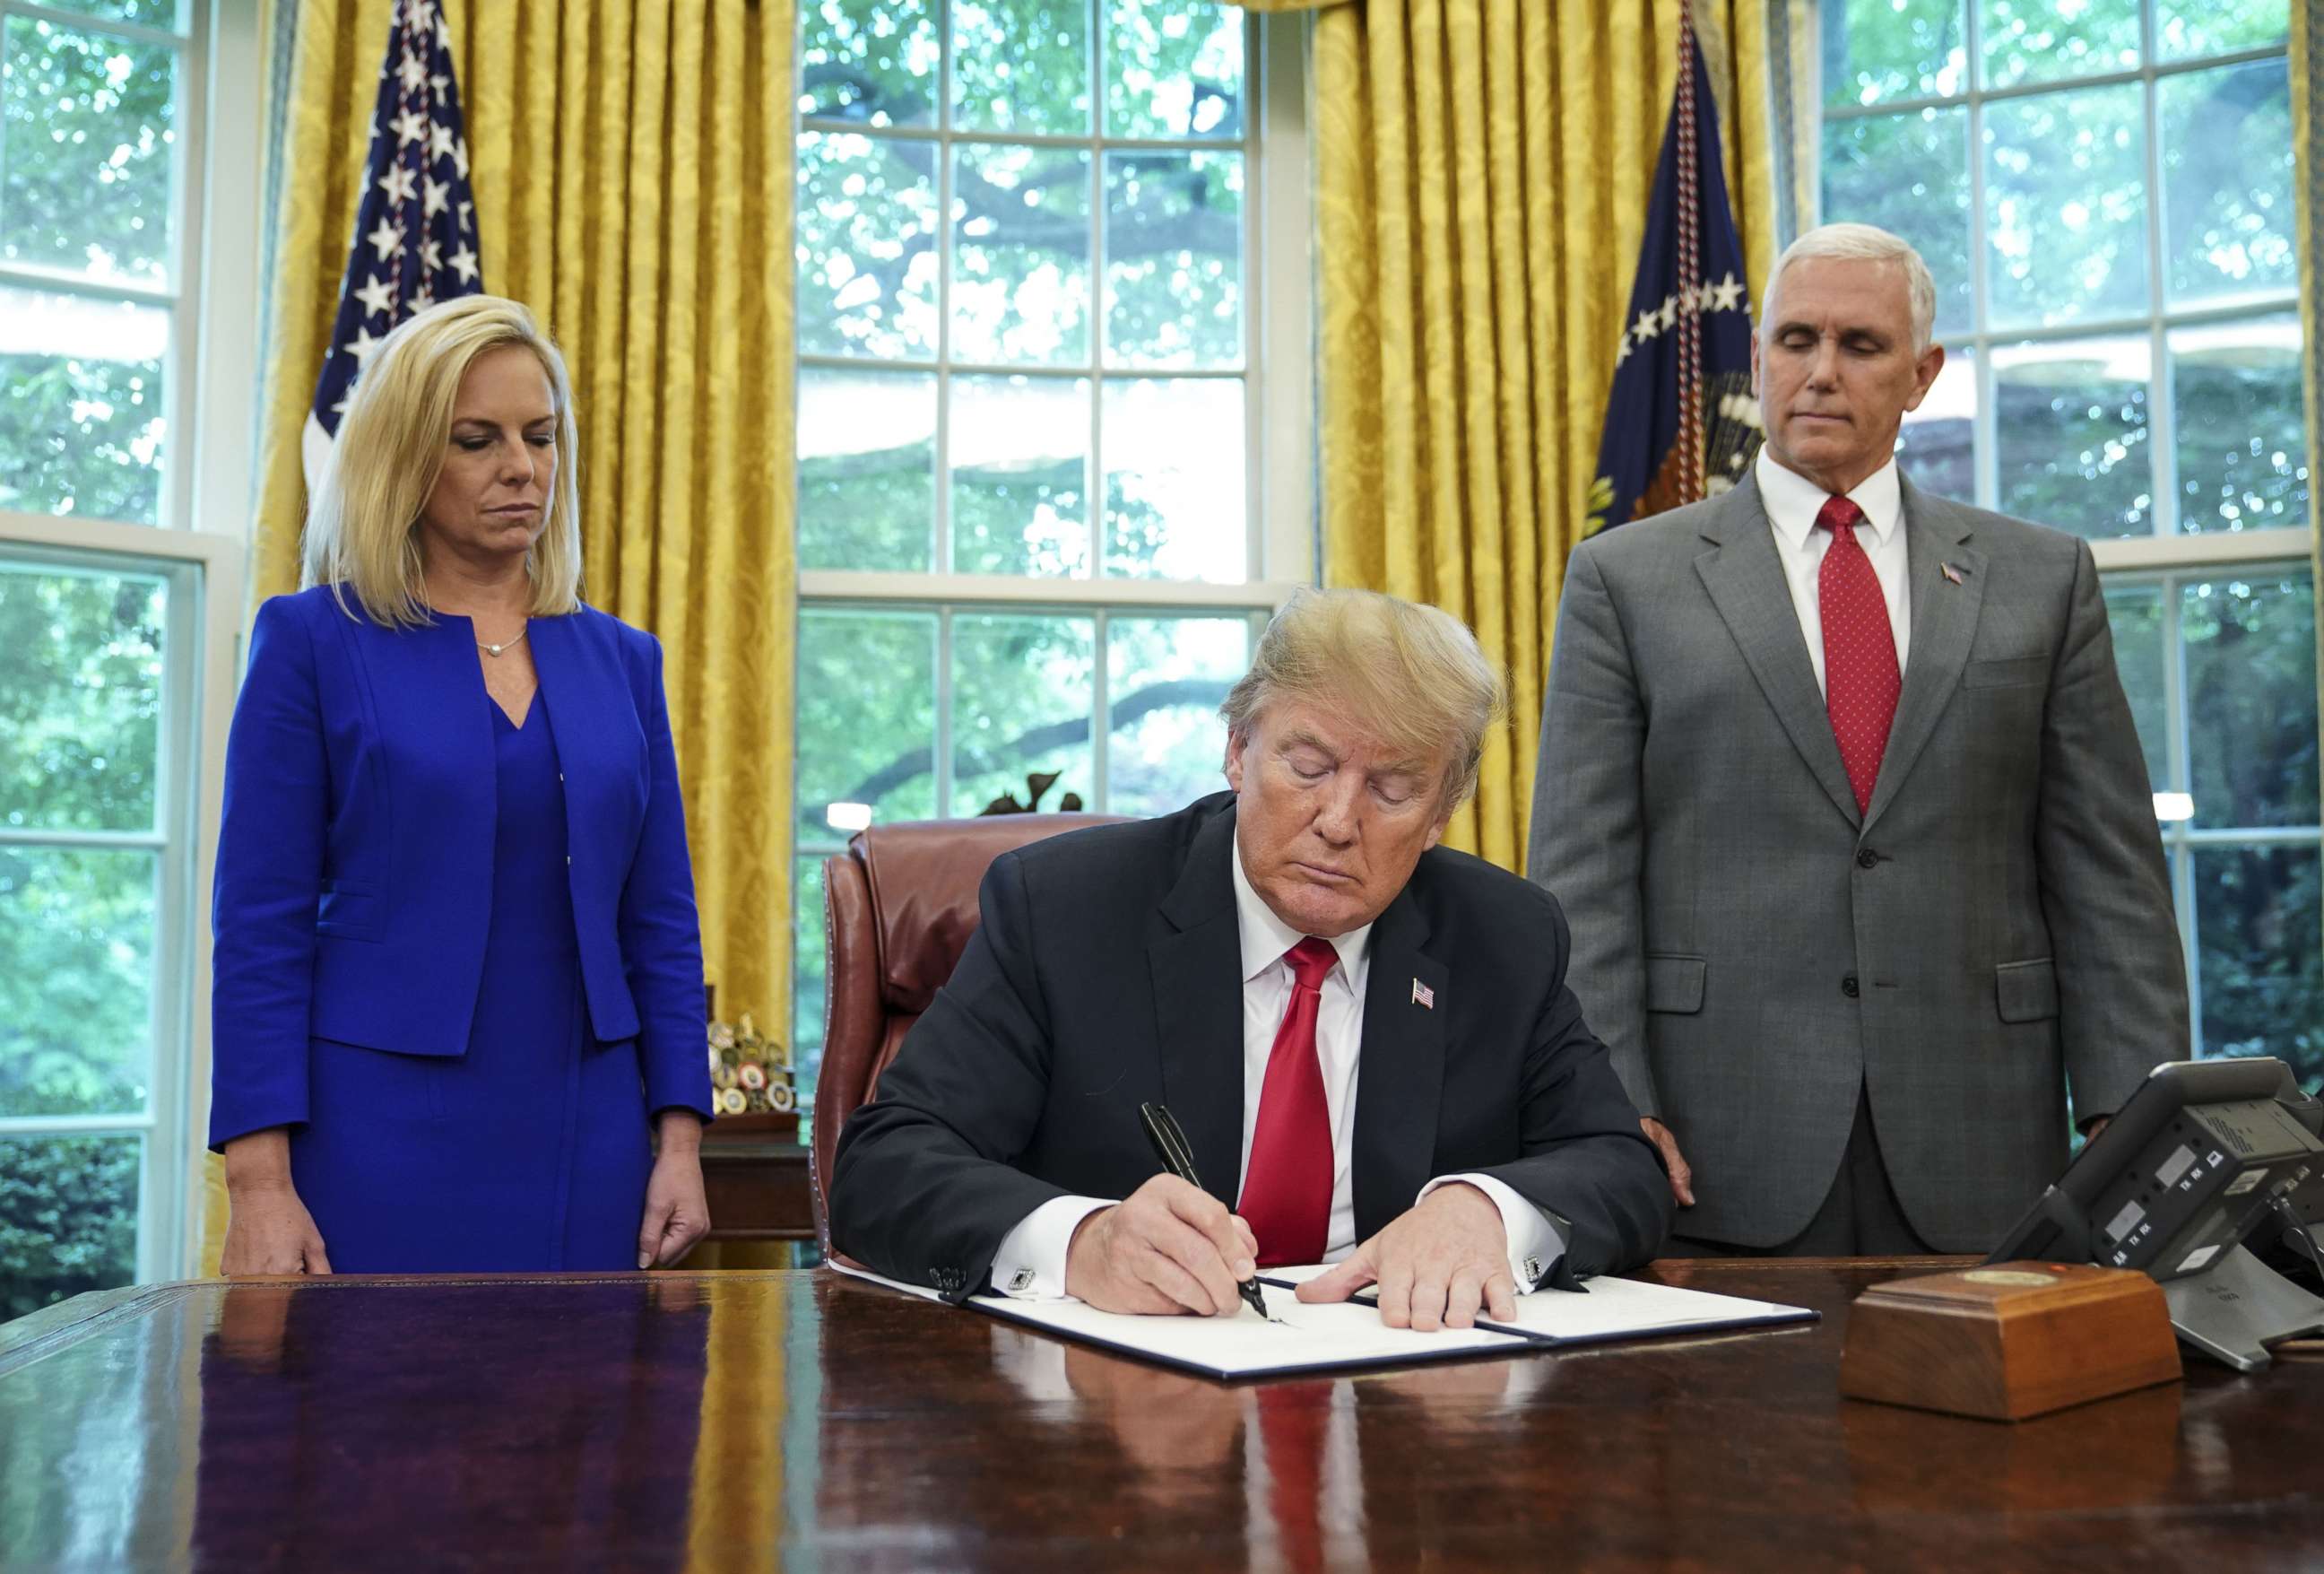 PHOTO: Homeland Security Secretary Kirstjen Nielsen (L) and Vice President Mike Pence watch as President Donald Trump signs an executive order on immigration in the Oval Office of the White House, June 20, 2018.